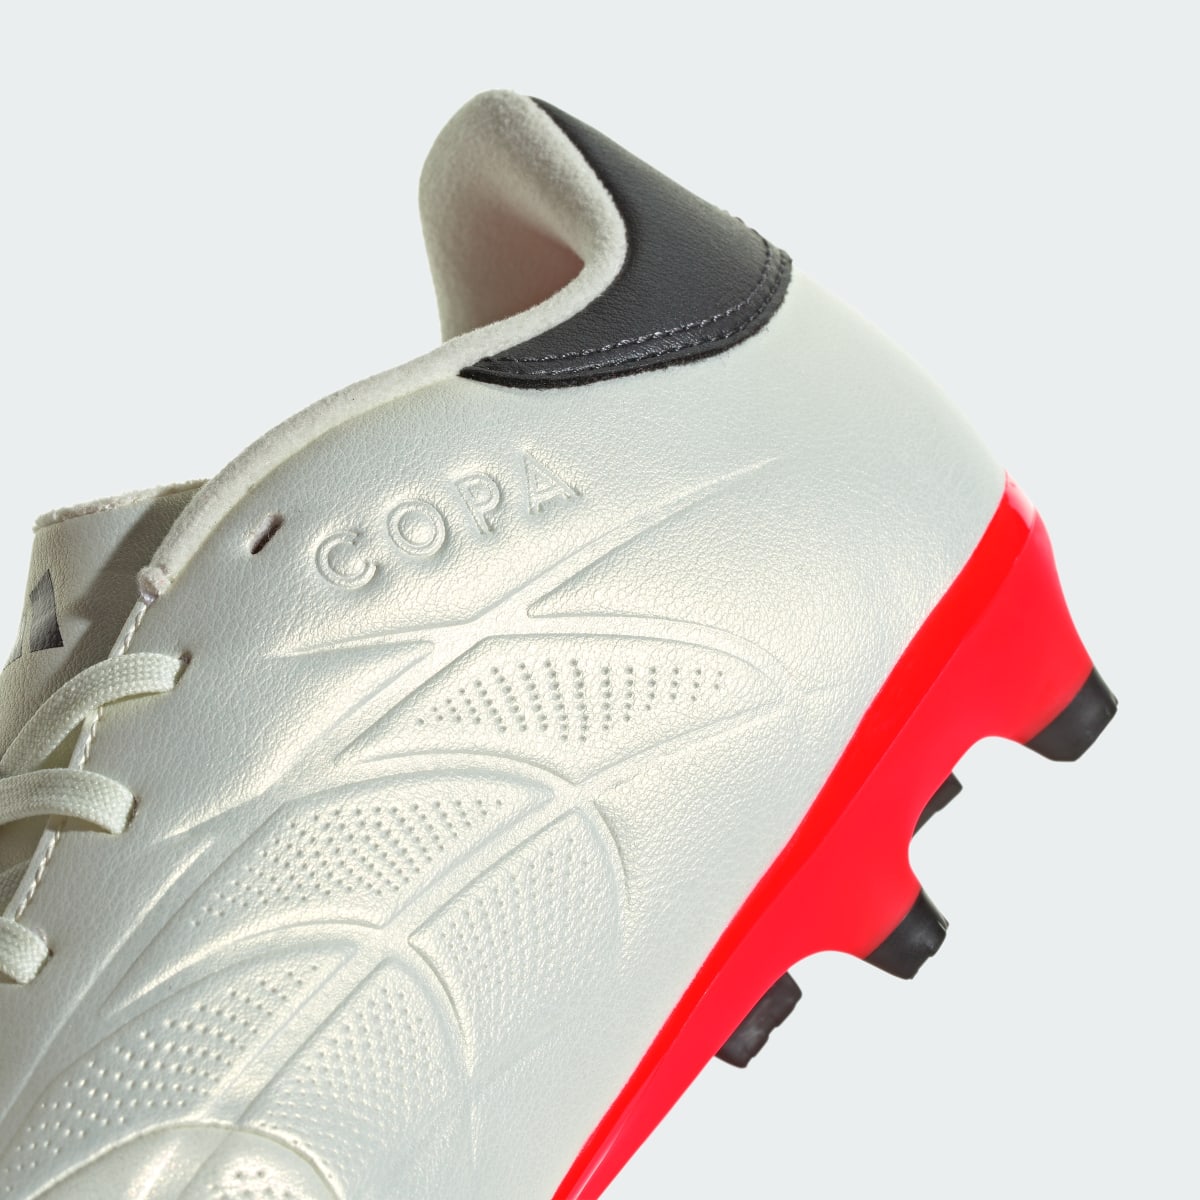 Adidas Copa Pure II League Firm Ground Boots. 4